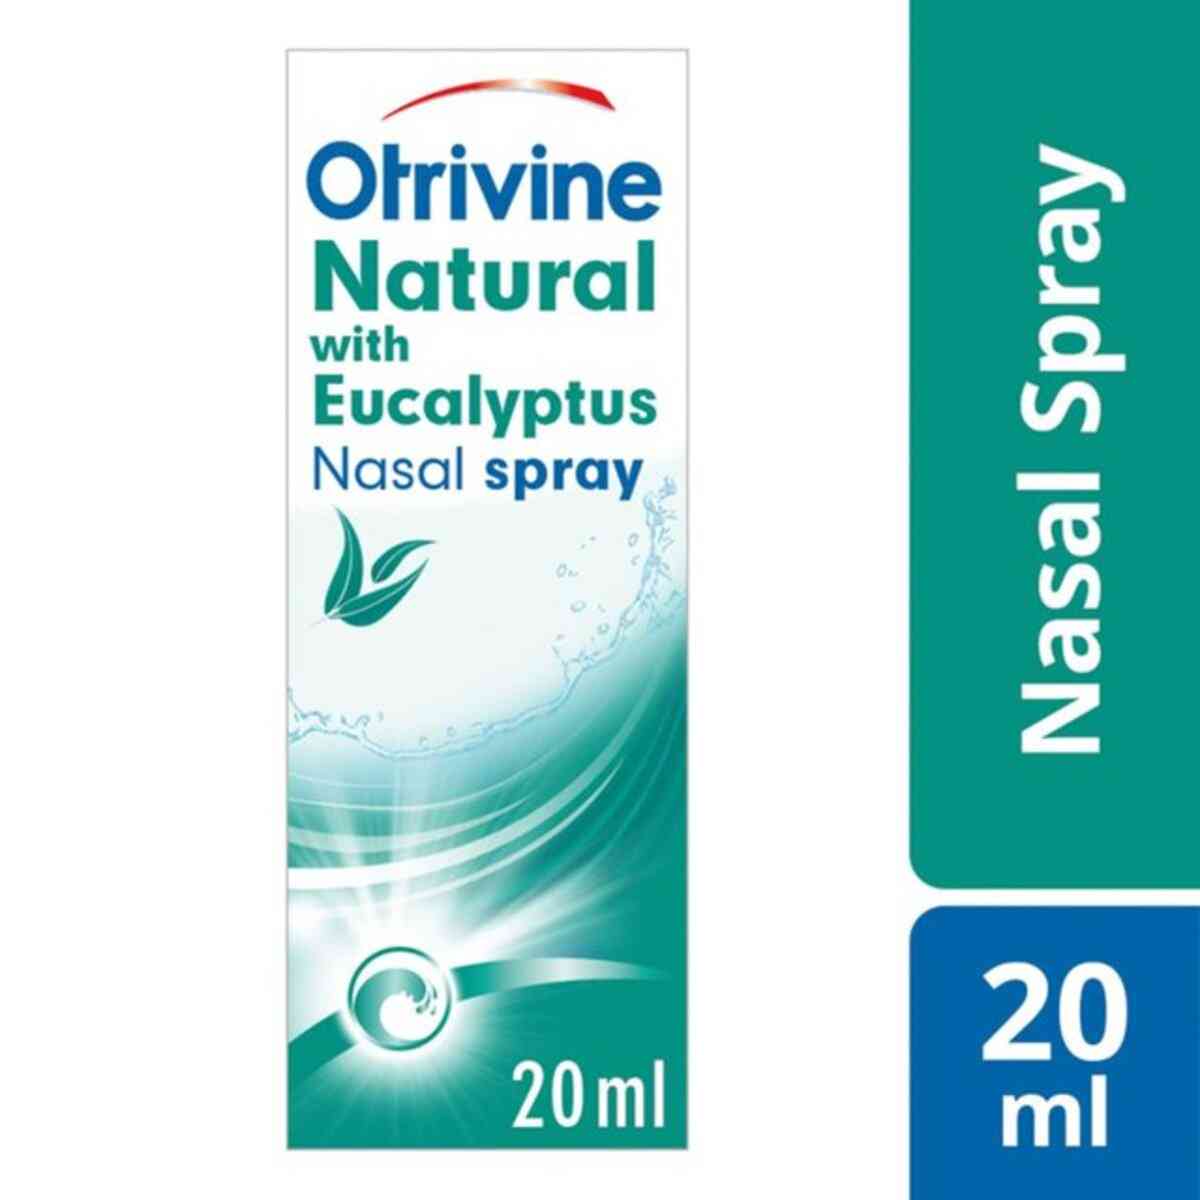 Otrivin Natural With Seawater And Eucalyptus